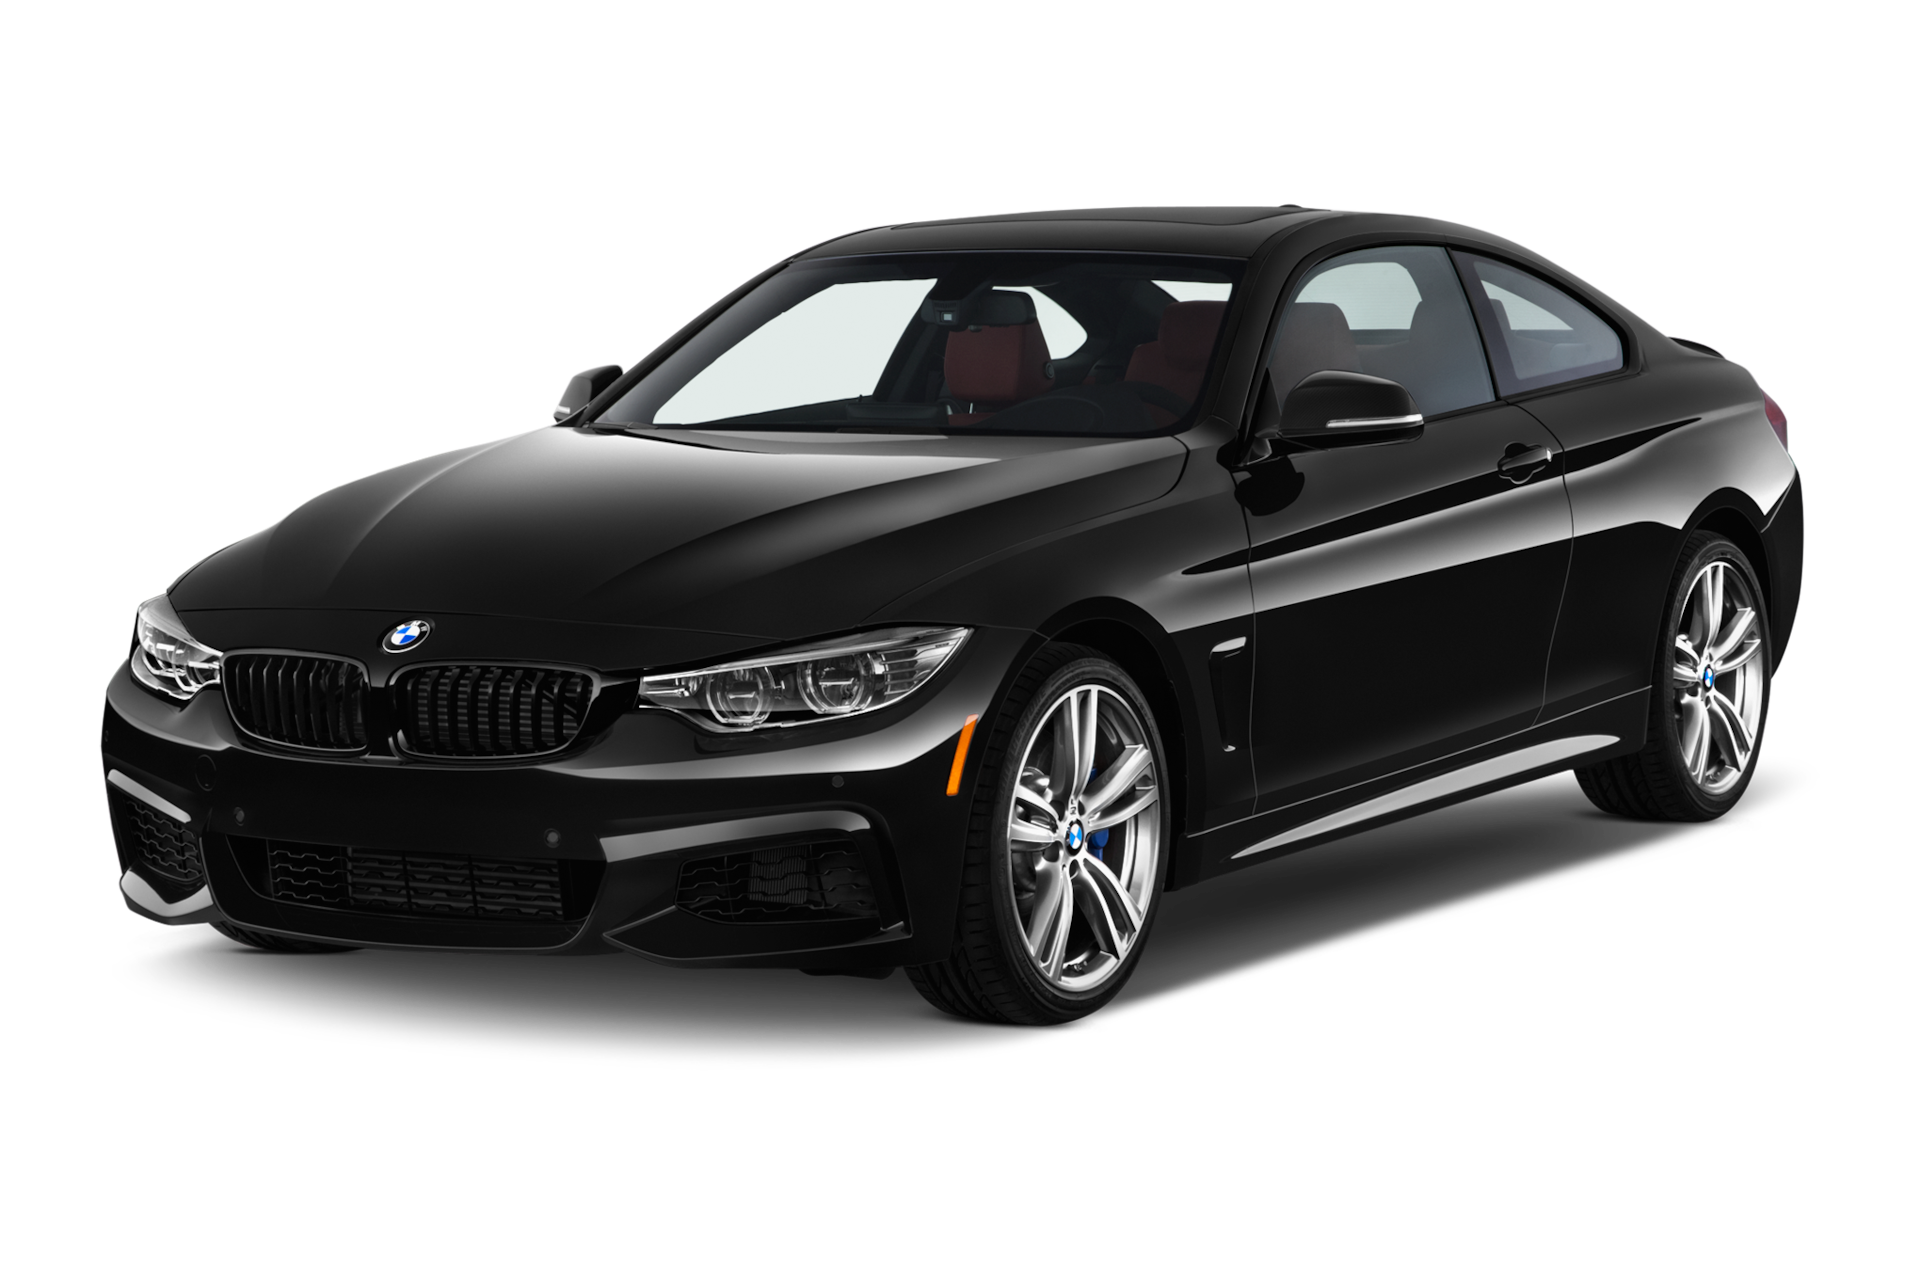 2017 BMW 4-Series Prices, Reviews, and Photos - MotorTrend